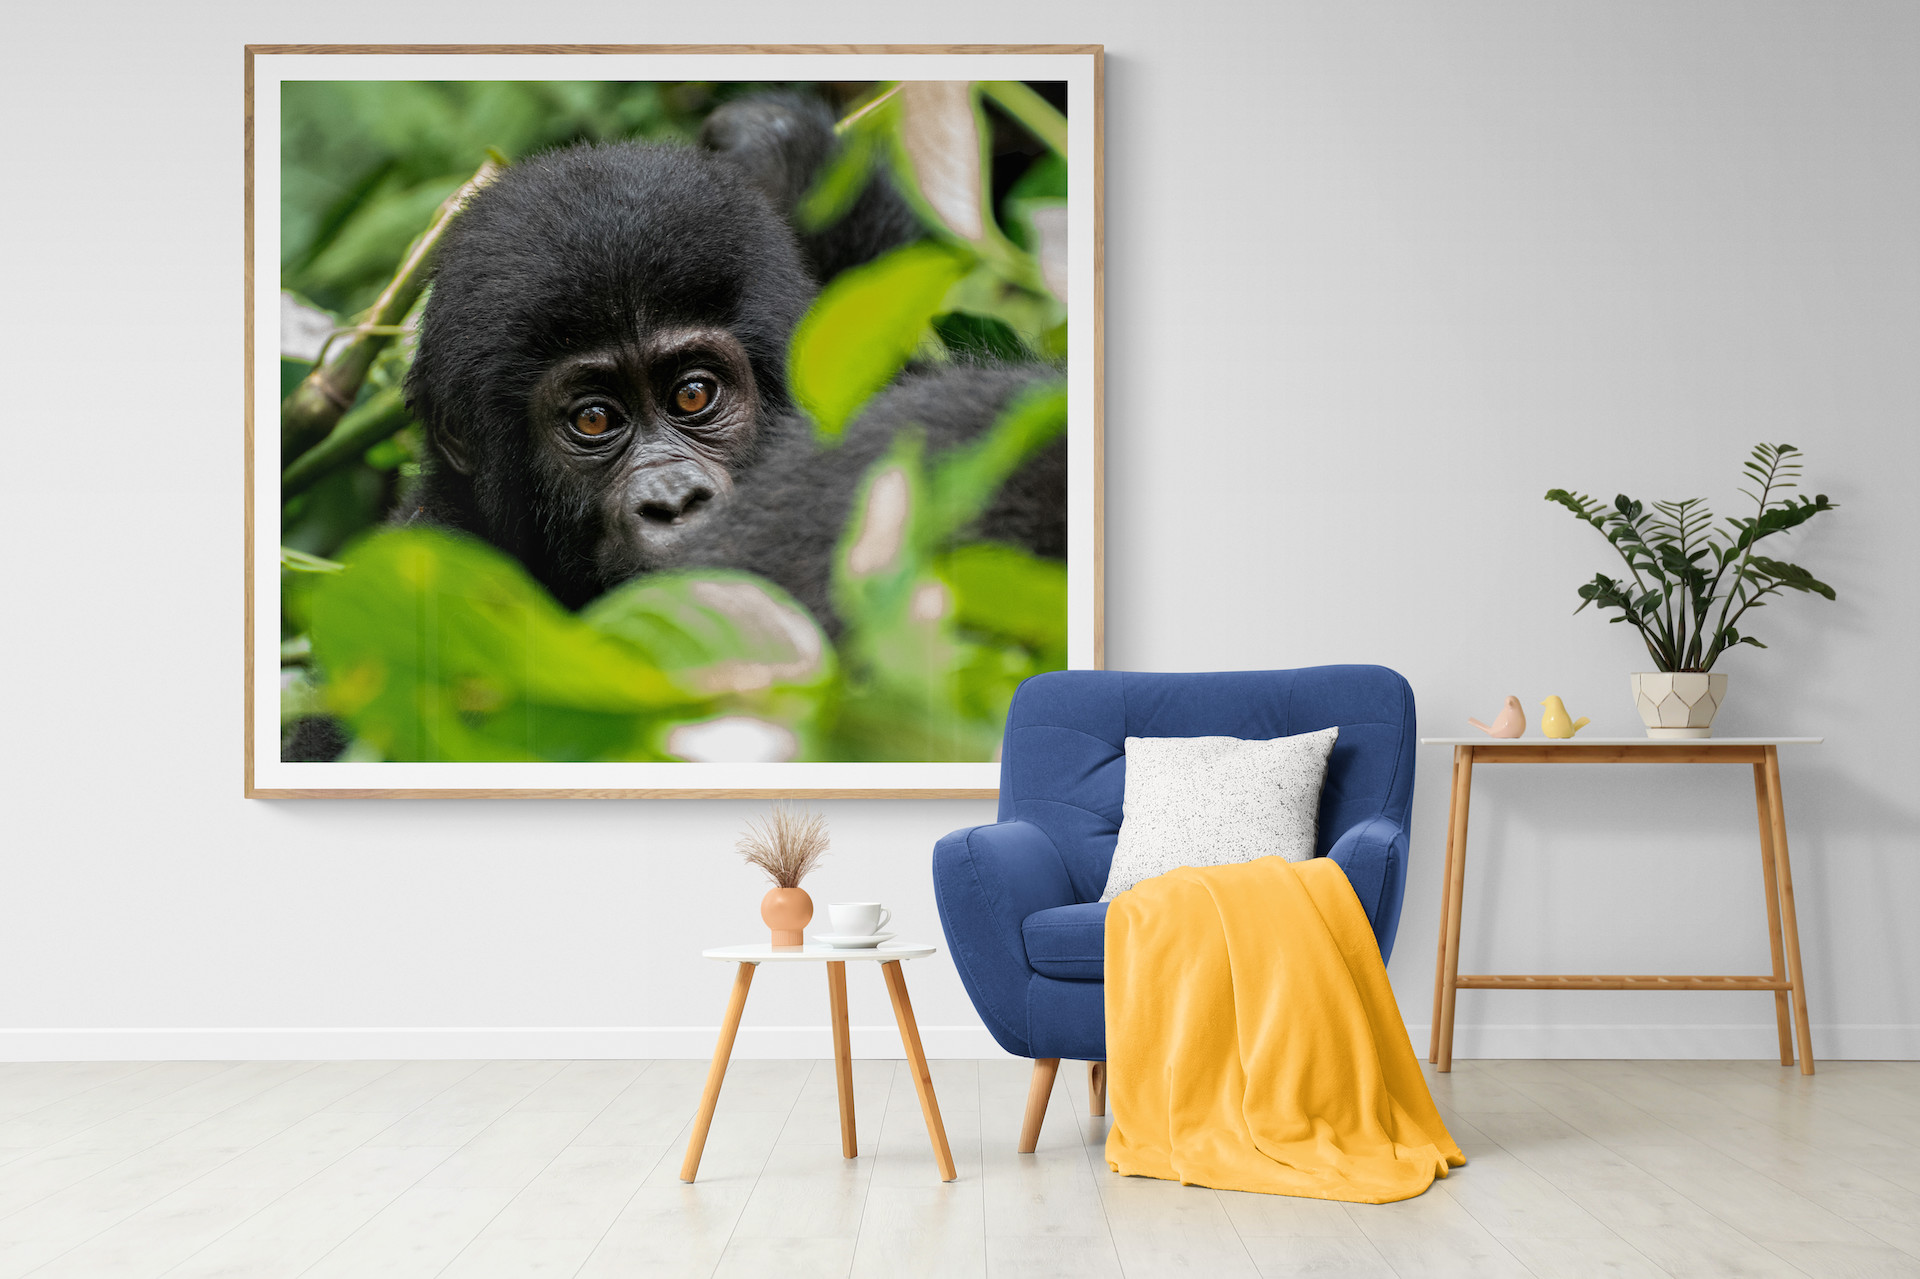 A fine art photographic print of a young gorilla hiding behind some leaves in the forest, hanging on the wall above a chair